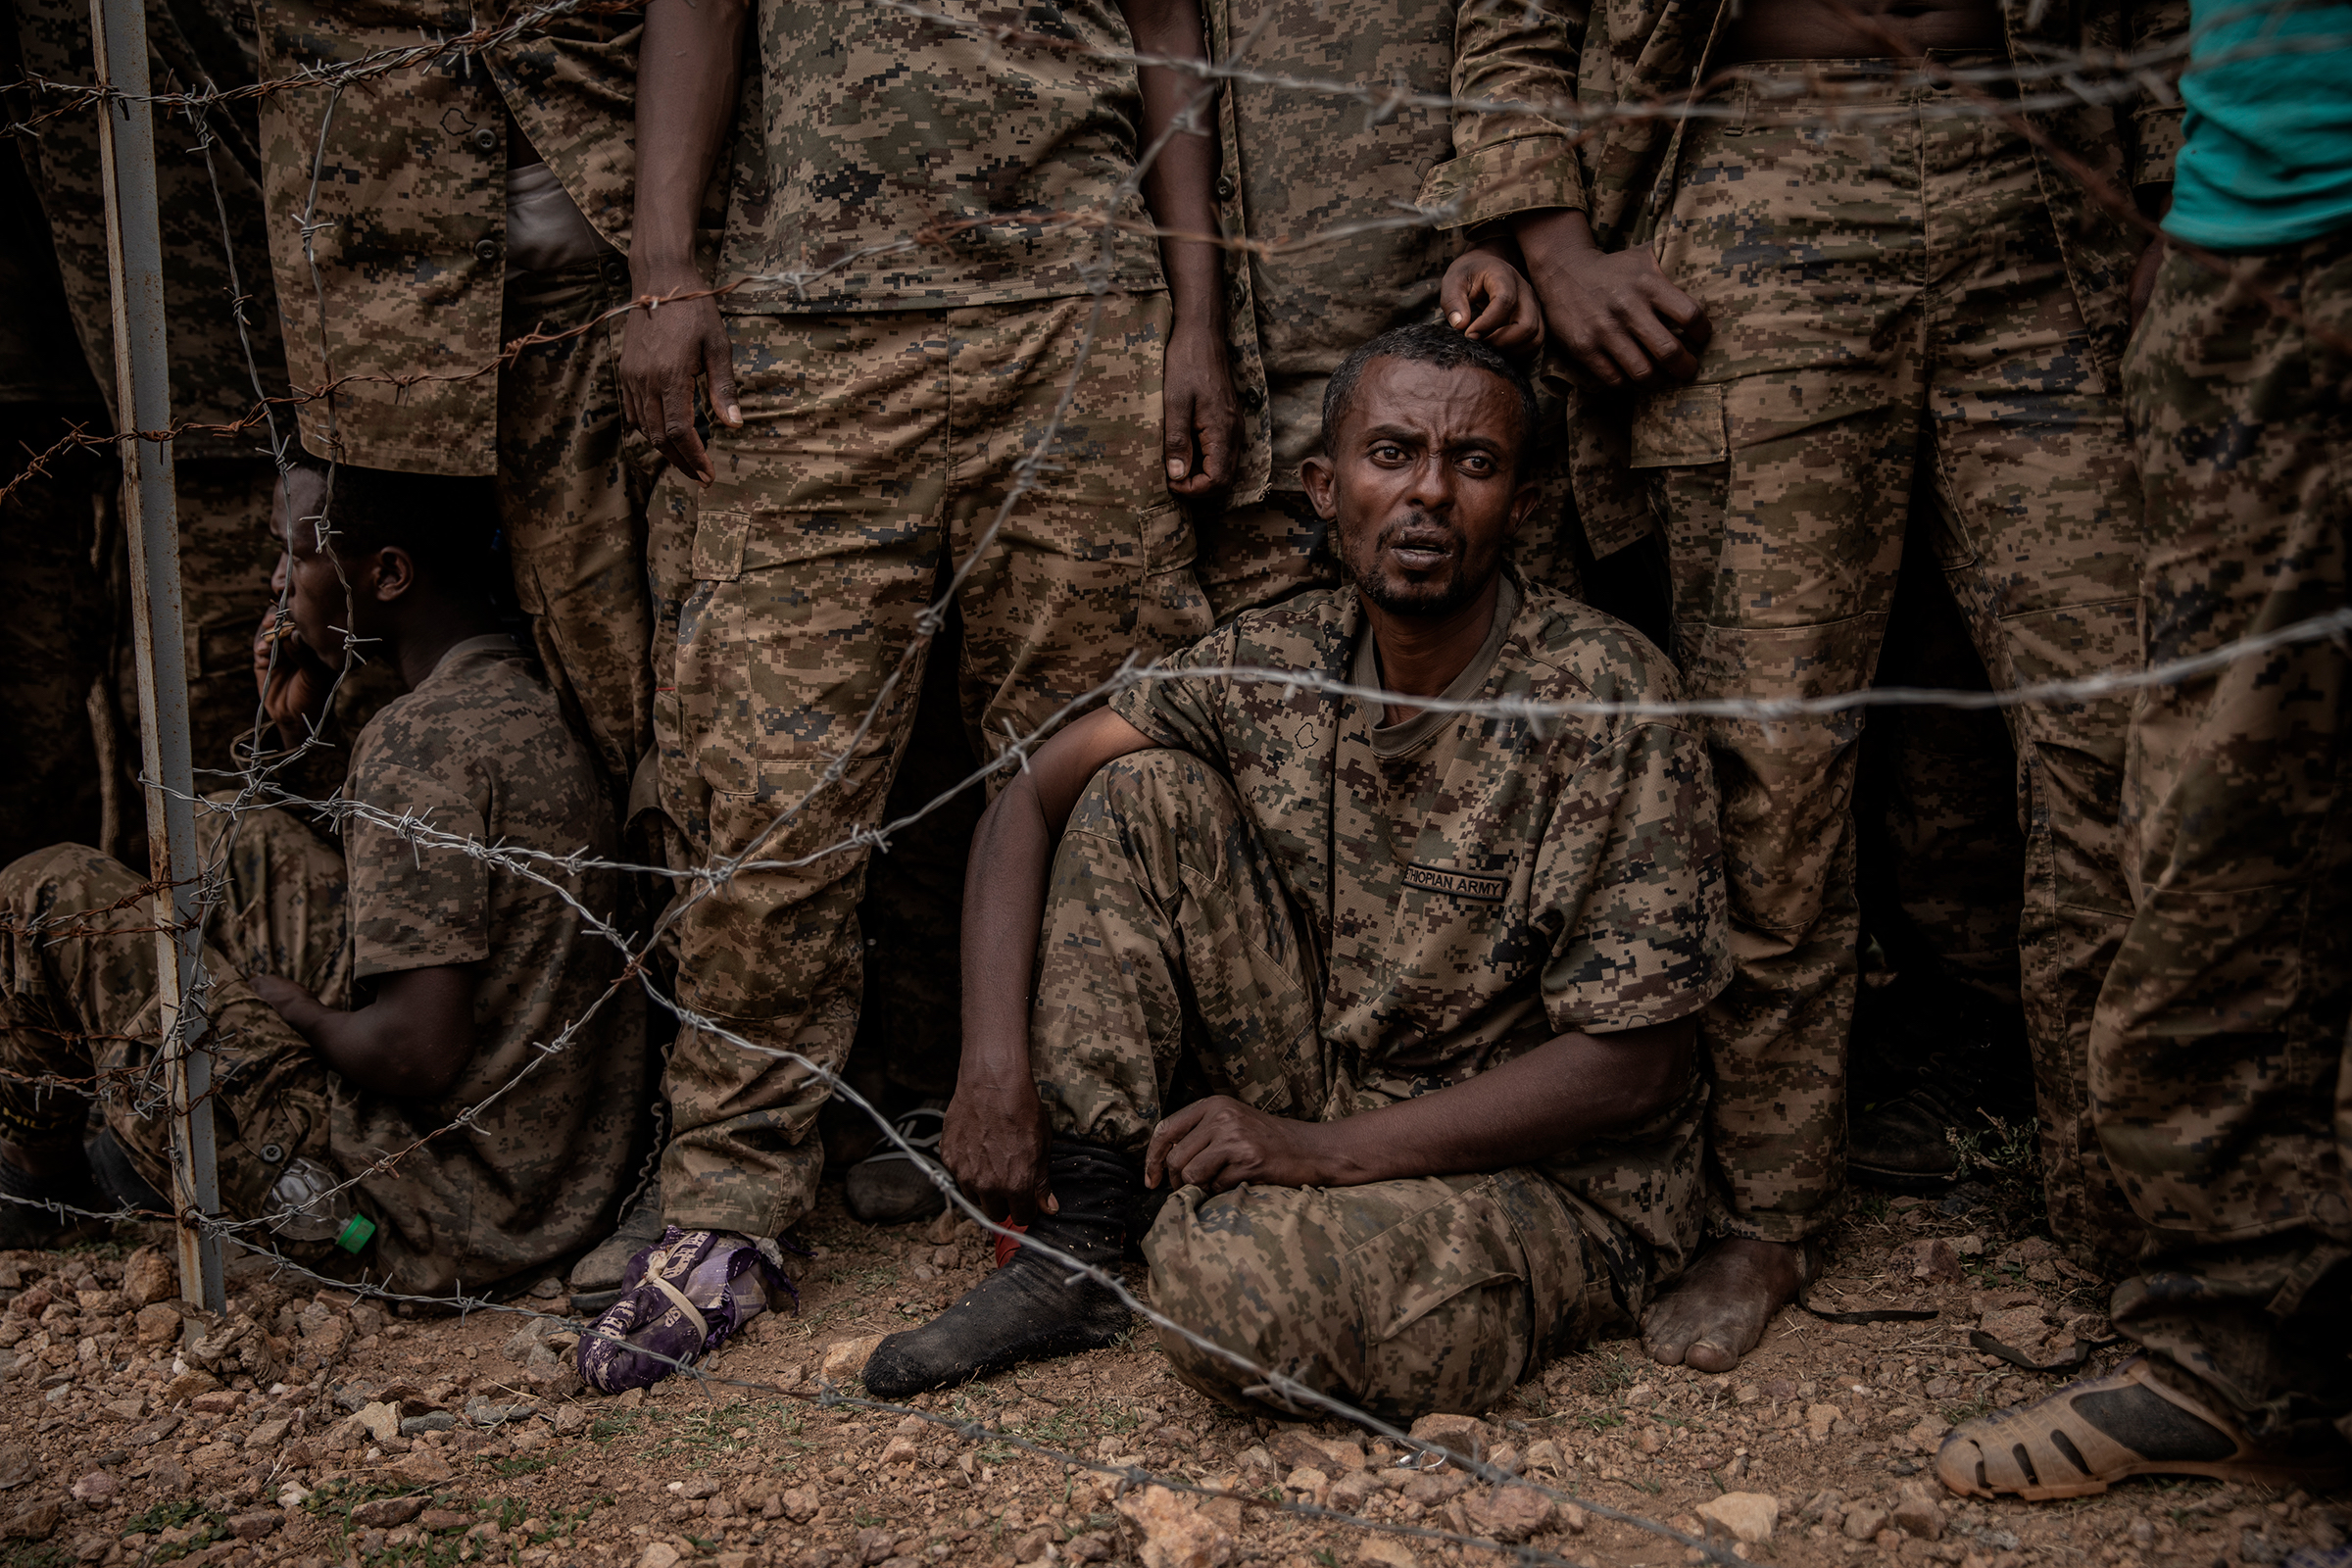 Ethiopian National Defense Forces soldiers are held at a remote mountain detention camp for an estimated 3,000 prisoners of war south of Mekele on June 23, after being captured during fighting the prior week by Tigray Defense Forces rebels. Most of the captured soldiers had their boots confiscated. (Finbarr O'Reilly)